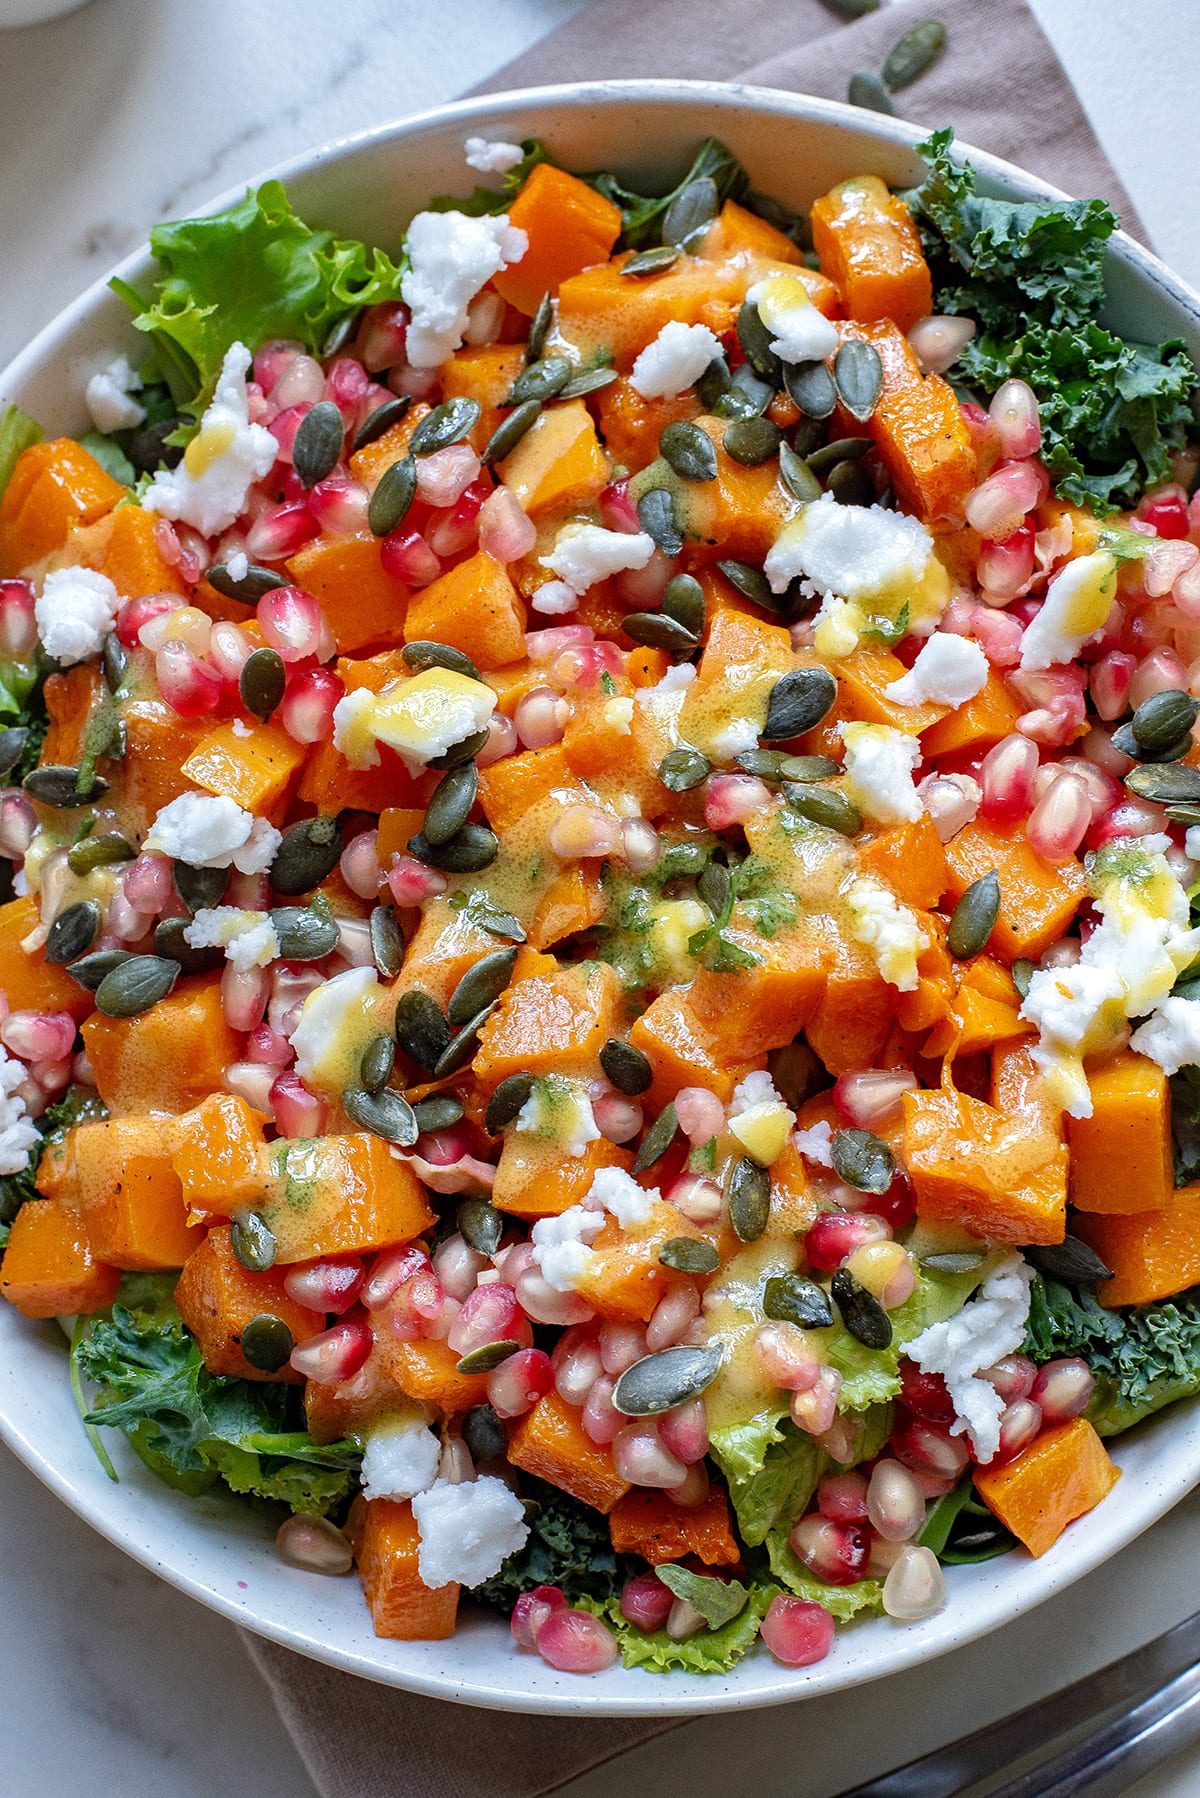 Winter salad with Butternut Squash and Pomegranate and With Honey Mustard Dressing.